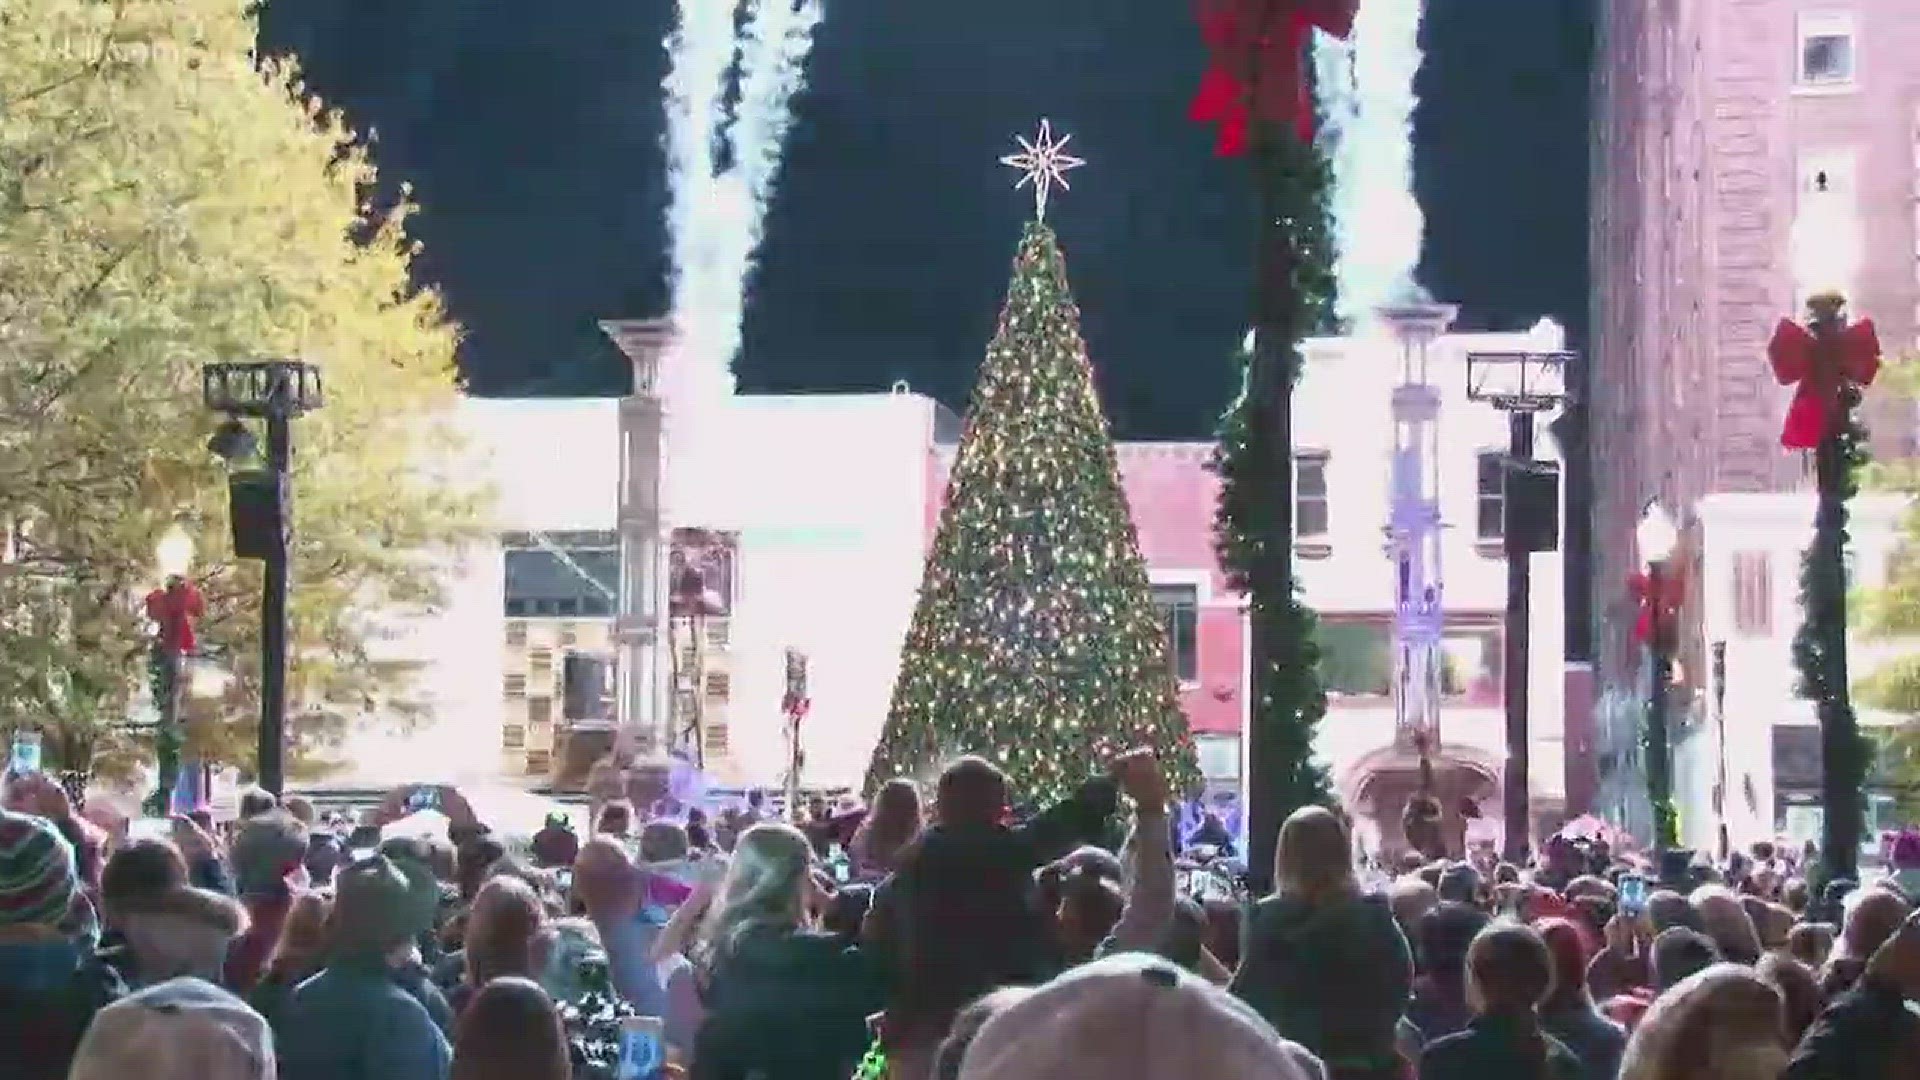 Nov. 24, 2017: Thousands of people celebrated the start of the holiday season in downtown Knoxville, remembering what matters most.